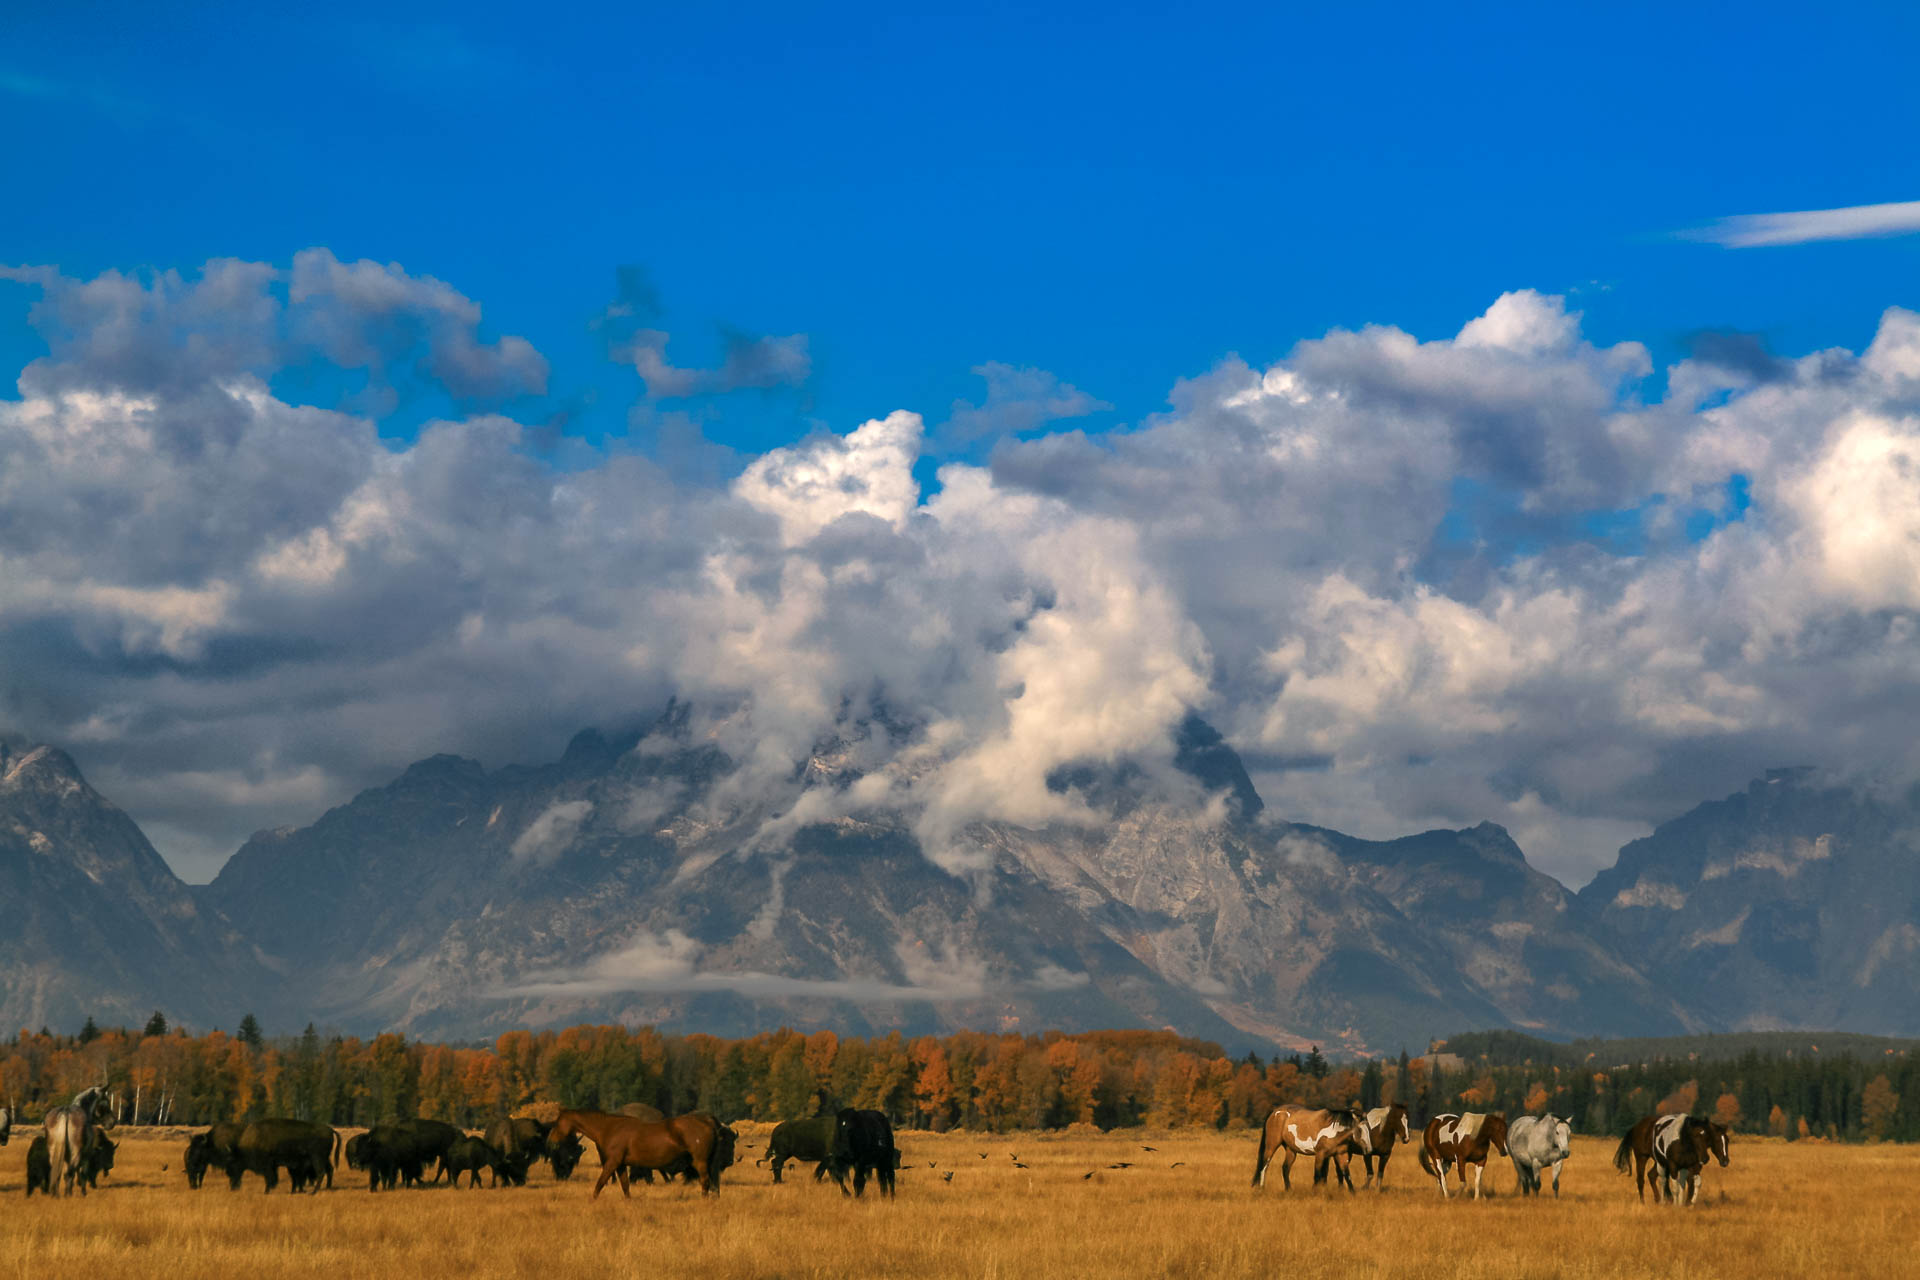 Bisons and horses at the foot of Mount Moran